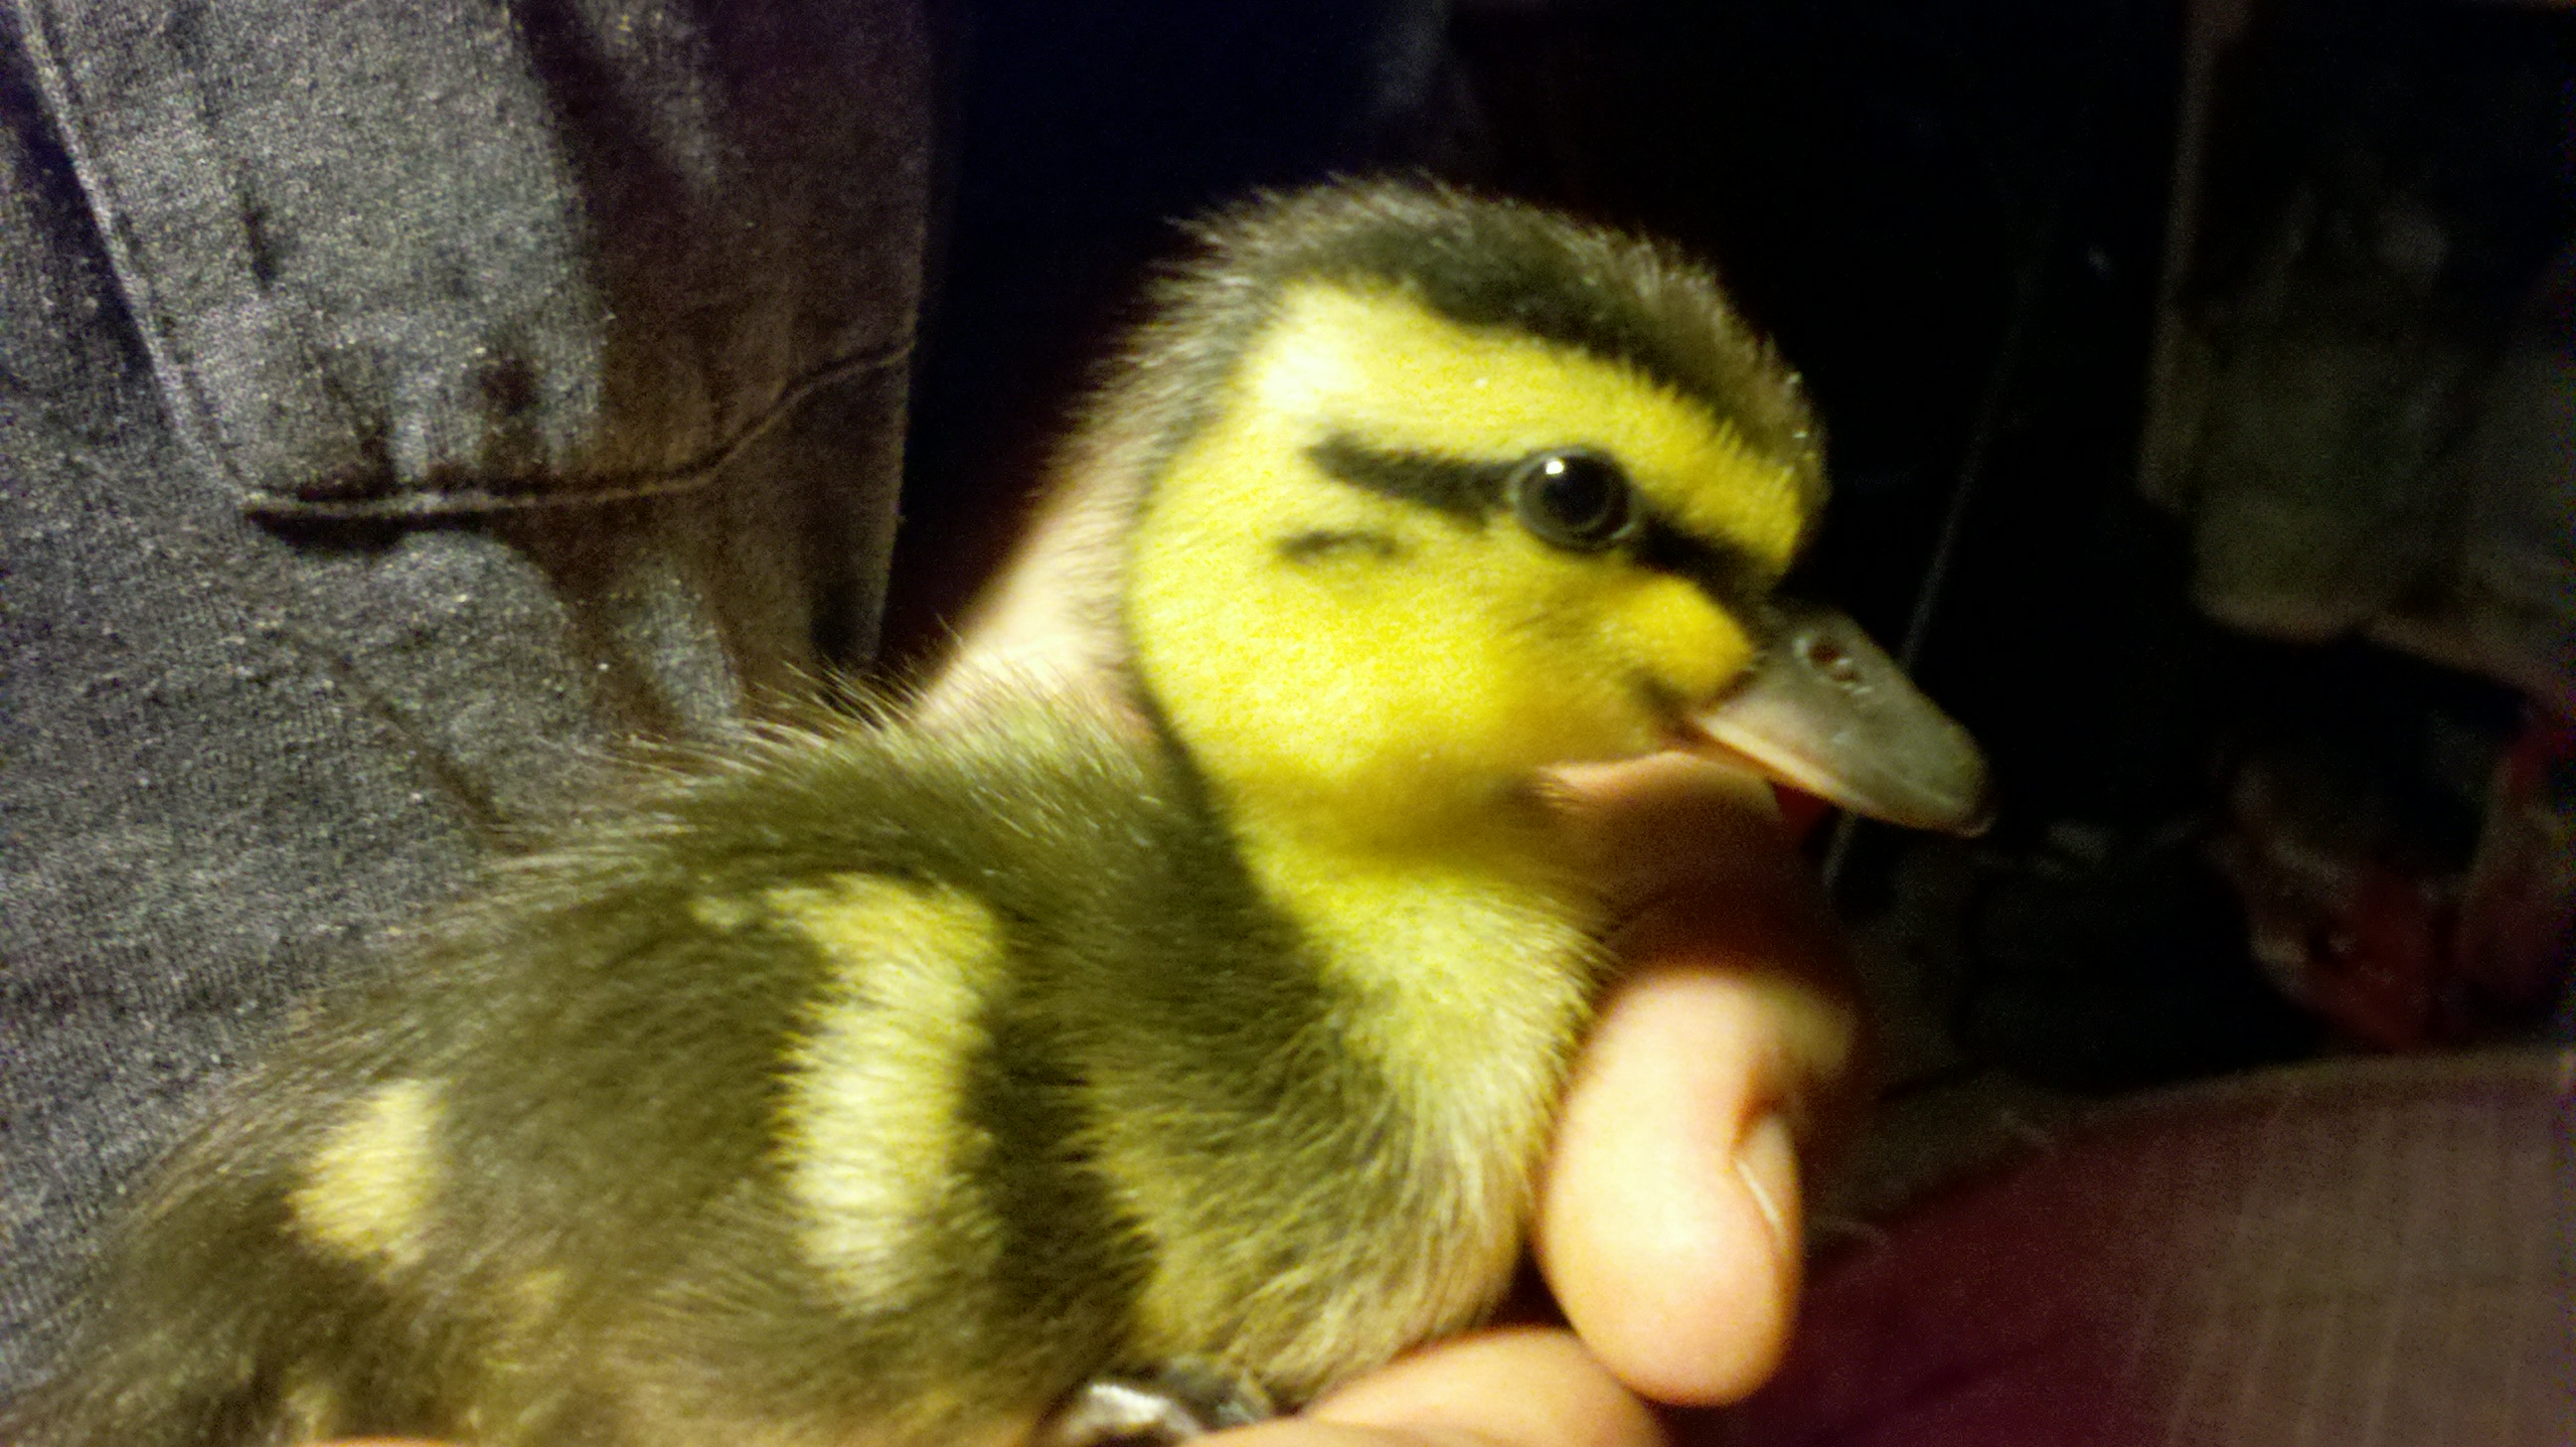 Face shot of duckling